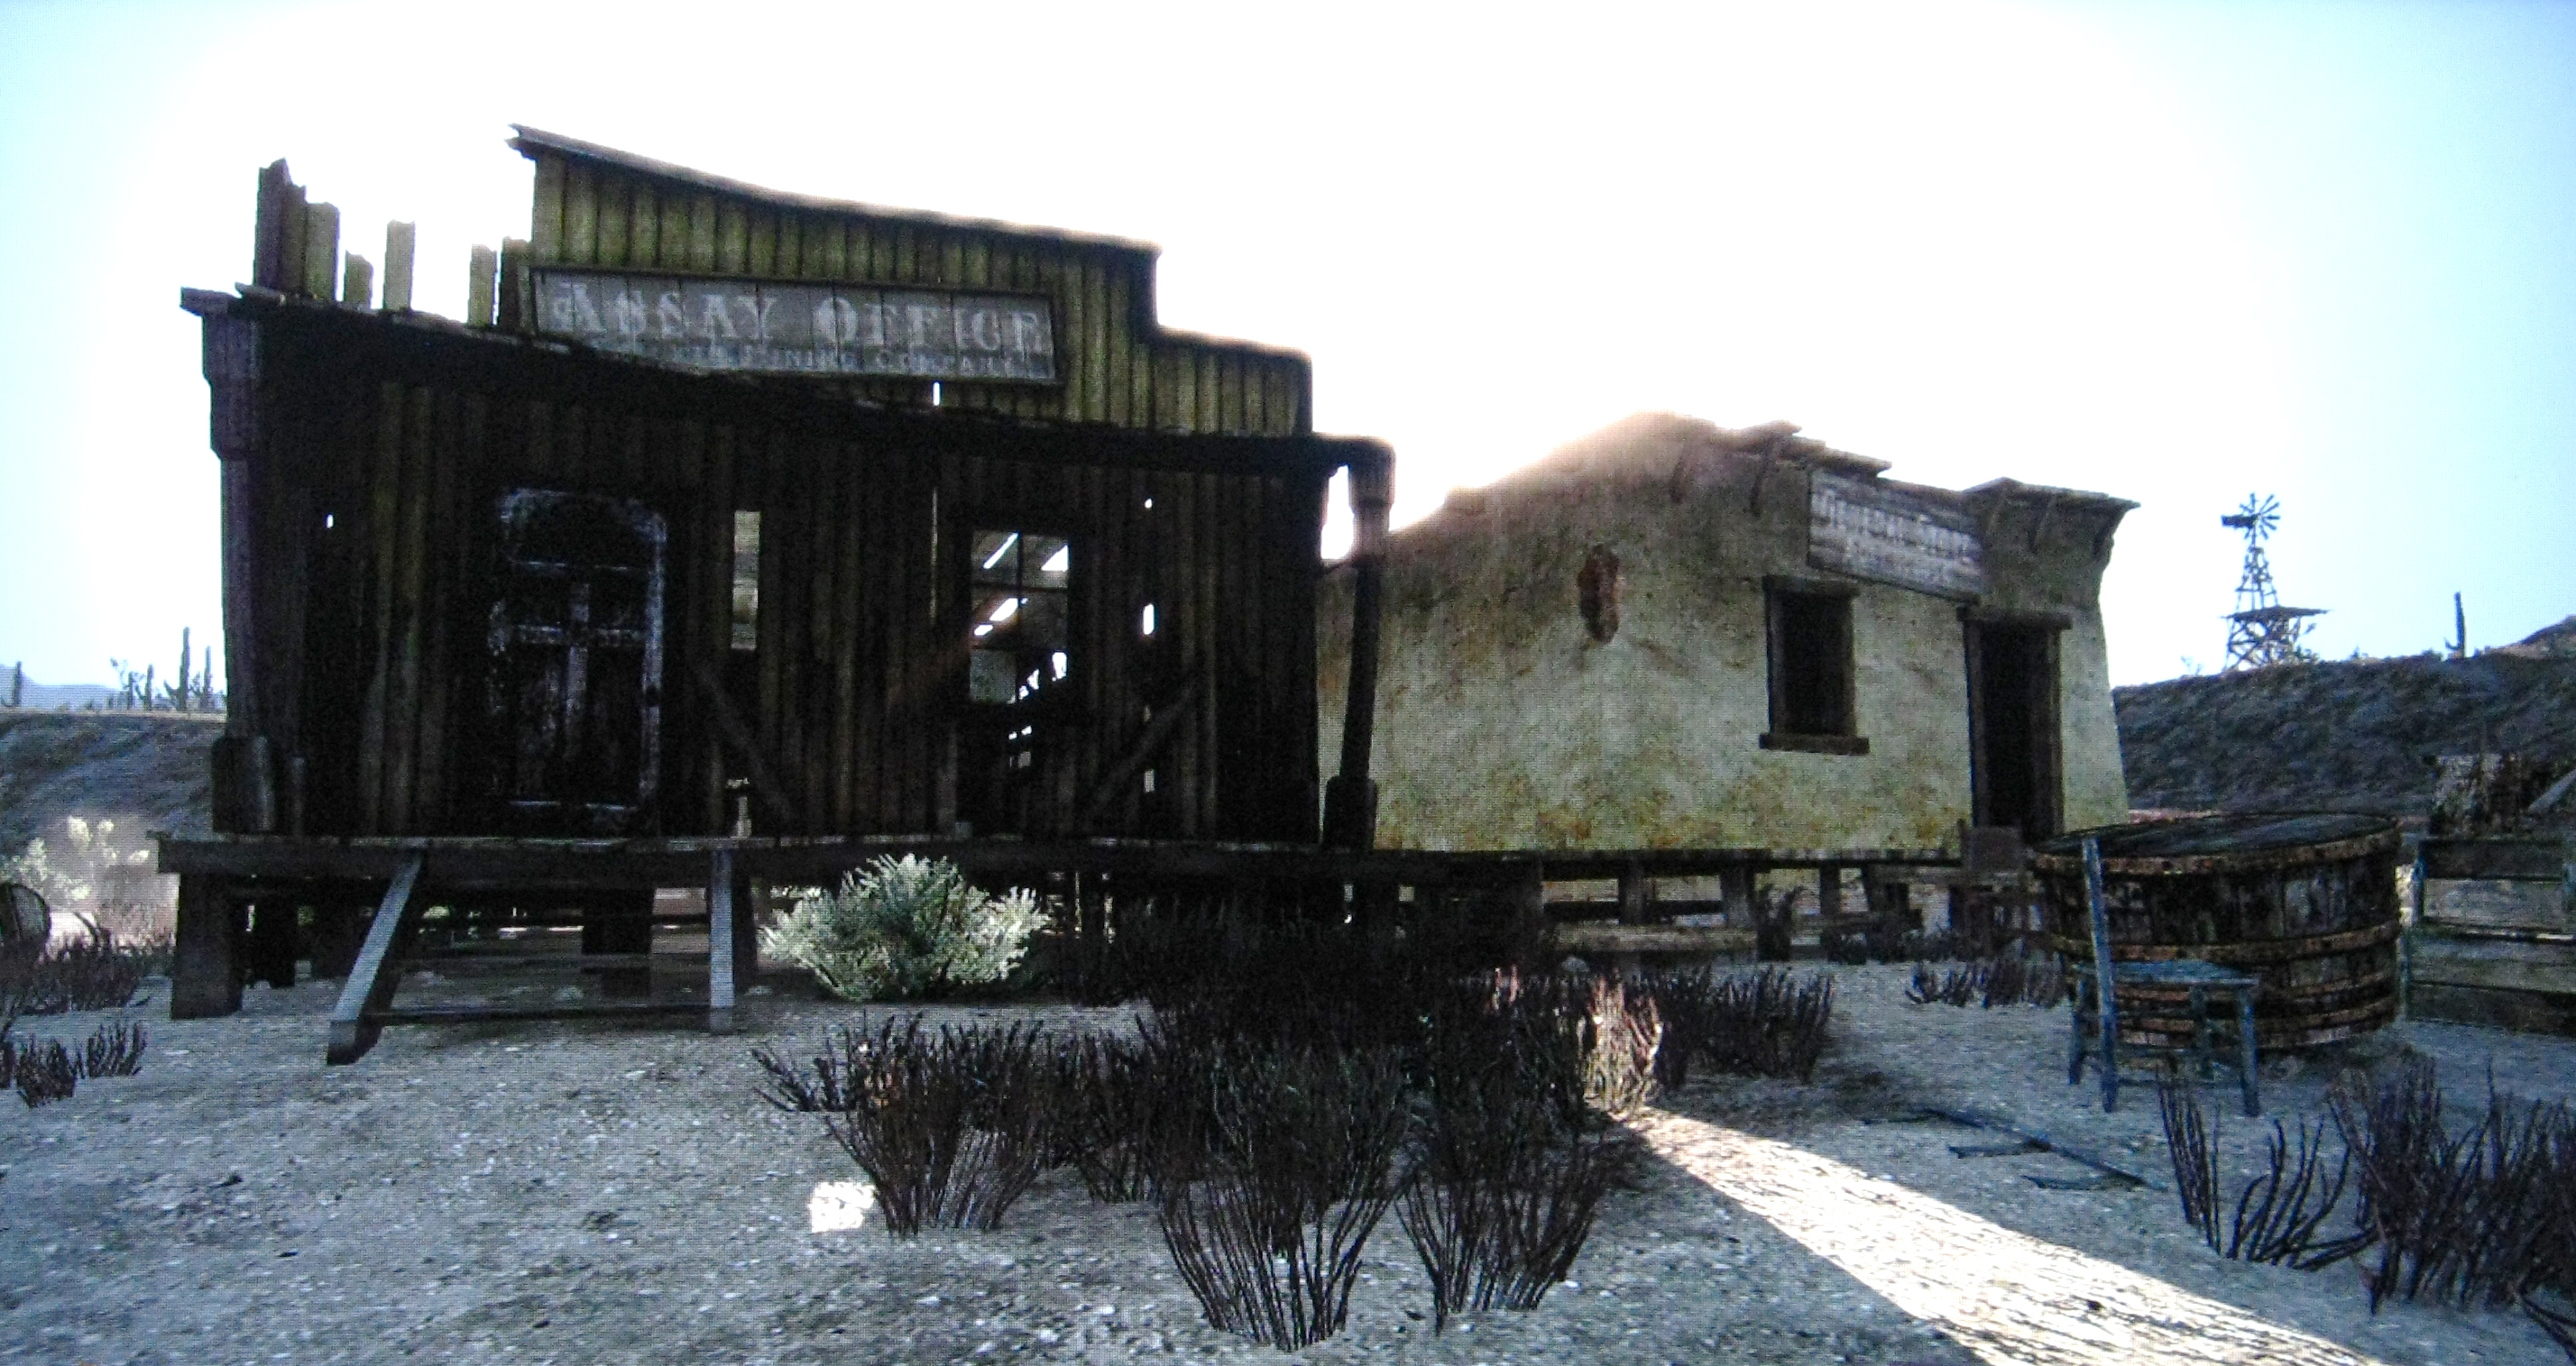 https://static.wikia.nocookie.net/reddeadredemption/images/3/3d/Rdr_tumbleweed_geenral_store_assay_office.jpg/revision/latest?cb=20110709062212